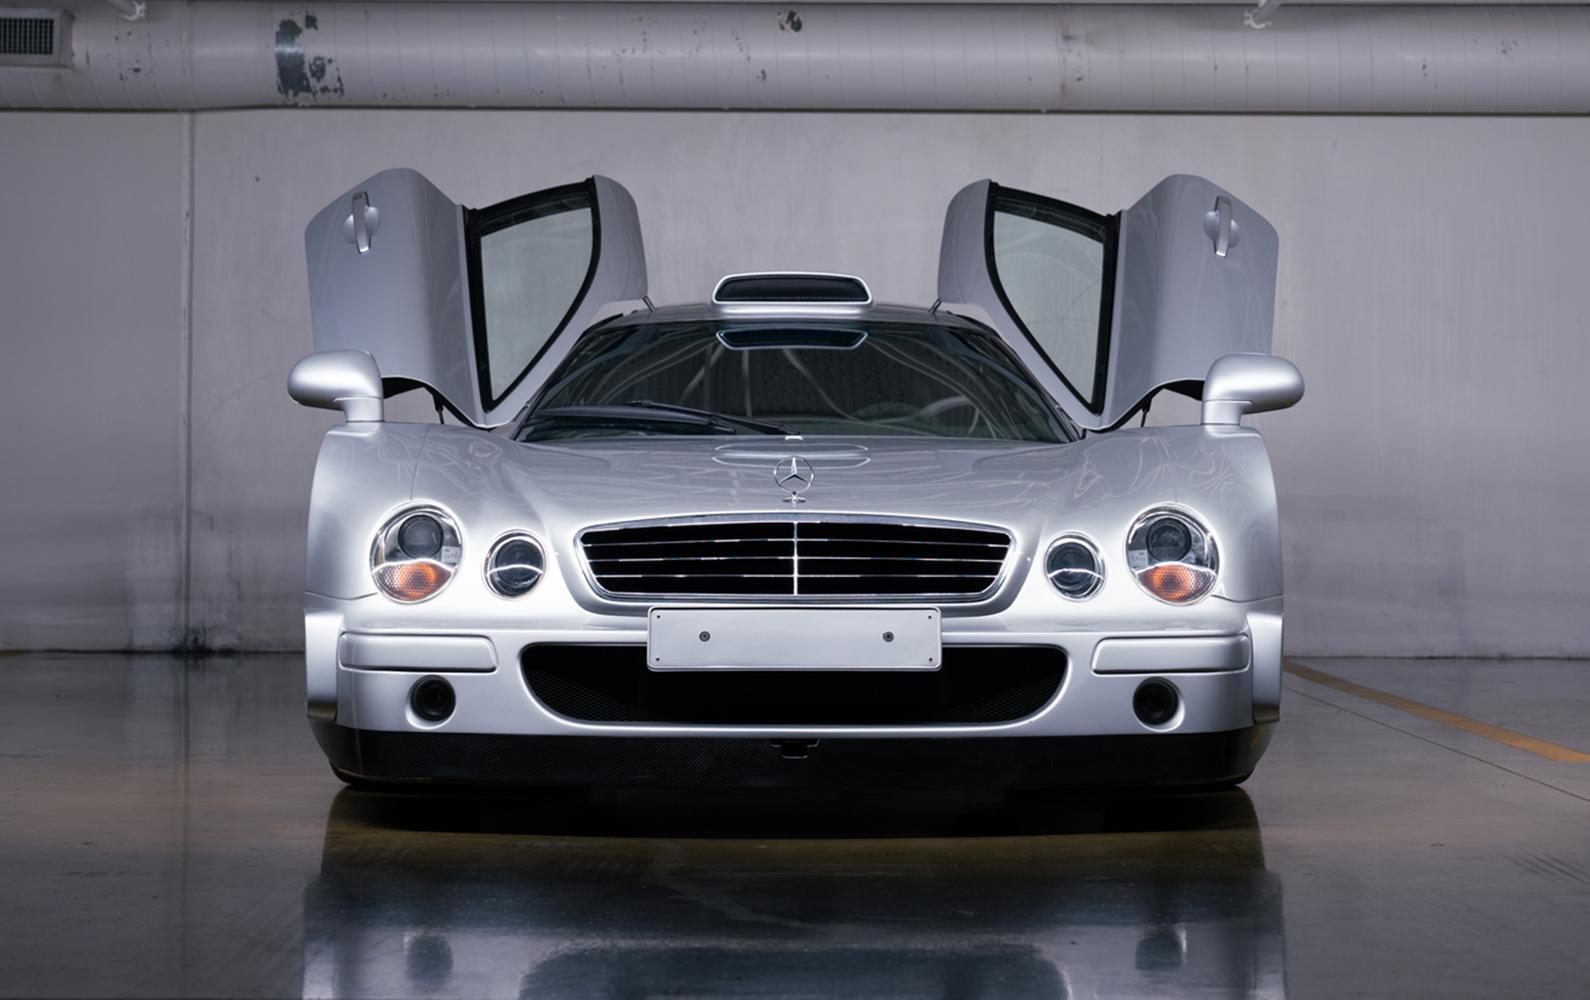 This CLK GTR, number 9 of 25 was expected to fetch up to $10 million at auction